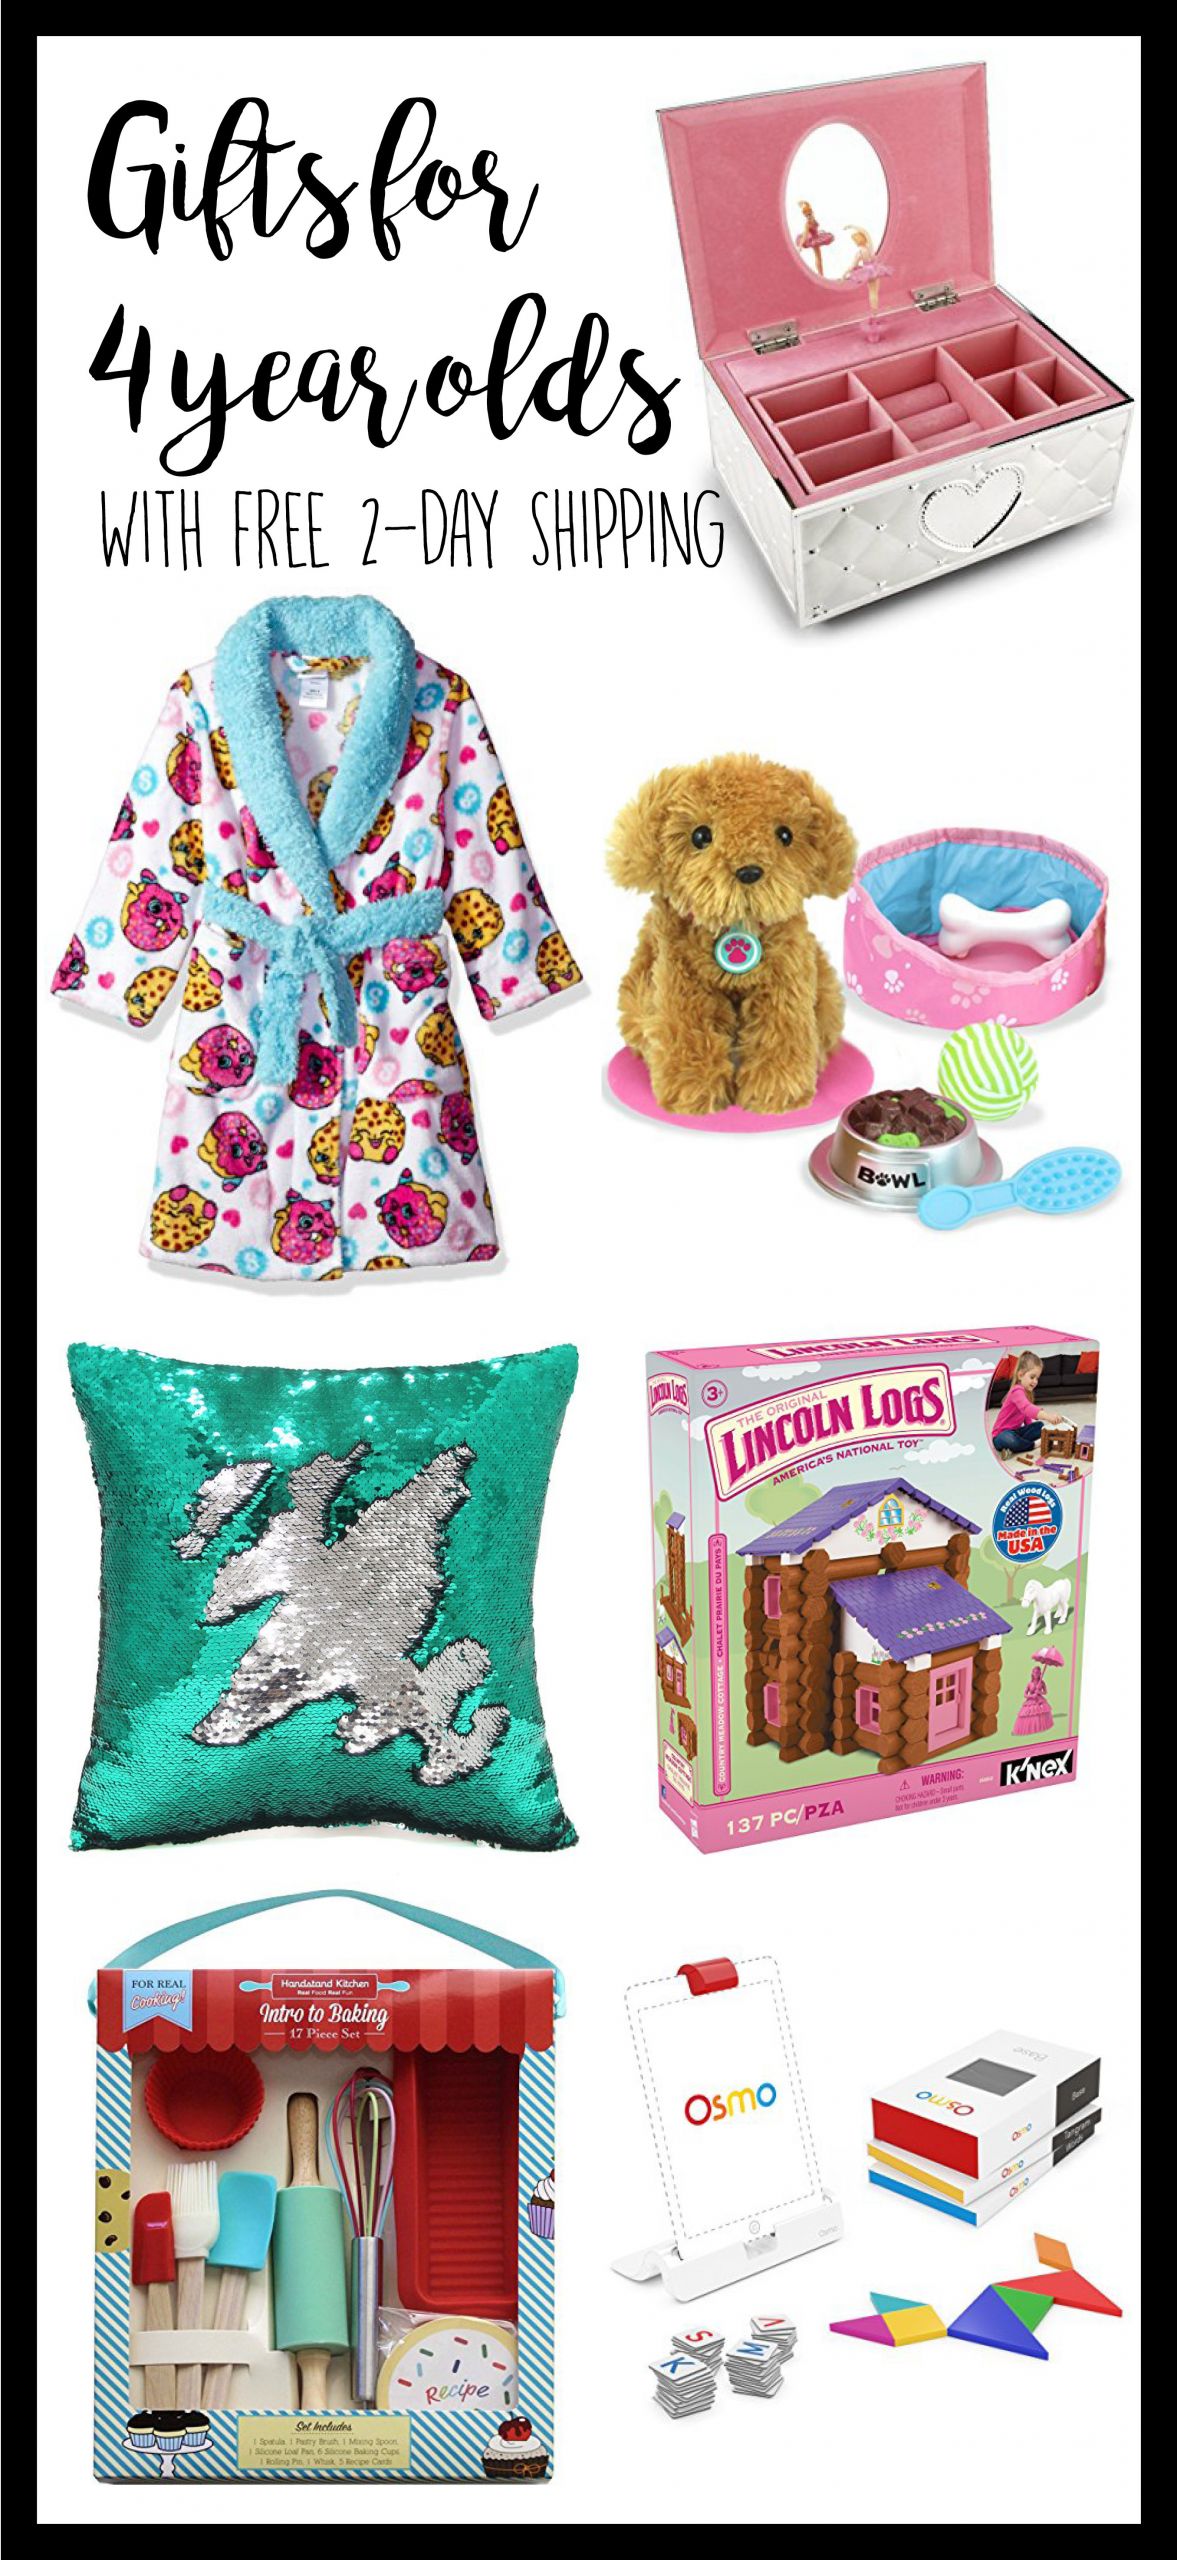 Birthday Gift Ideas For 11 Year Old Girls
 4 Year Old Gift Ideas Gift ideas for 4 year old Girls